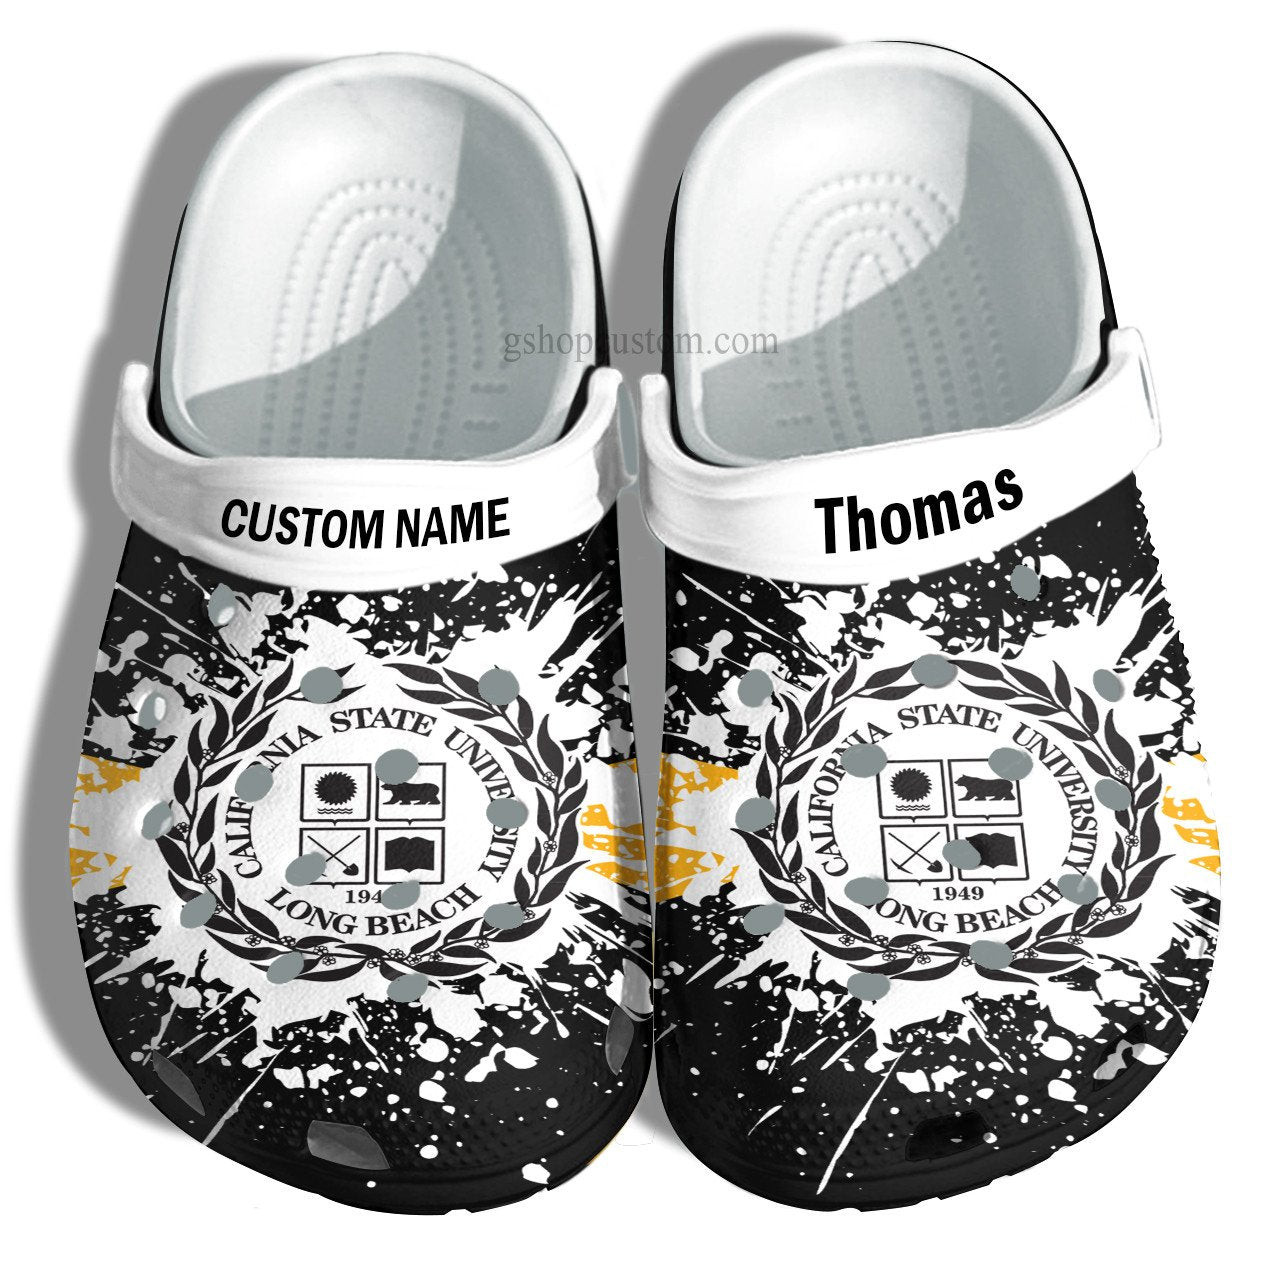 California State University Long Beach Graduation Gifts Croc Shoes Customize- Admission Gift Crocs Shoes